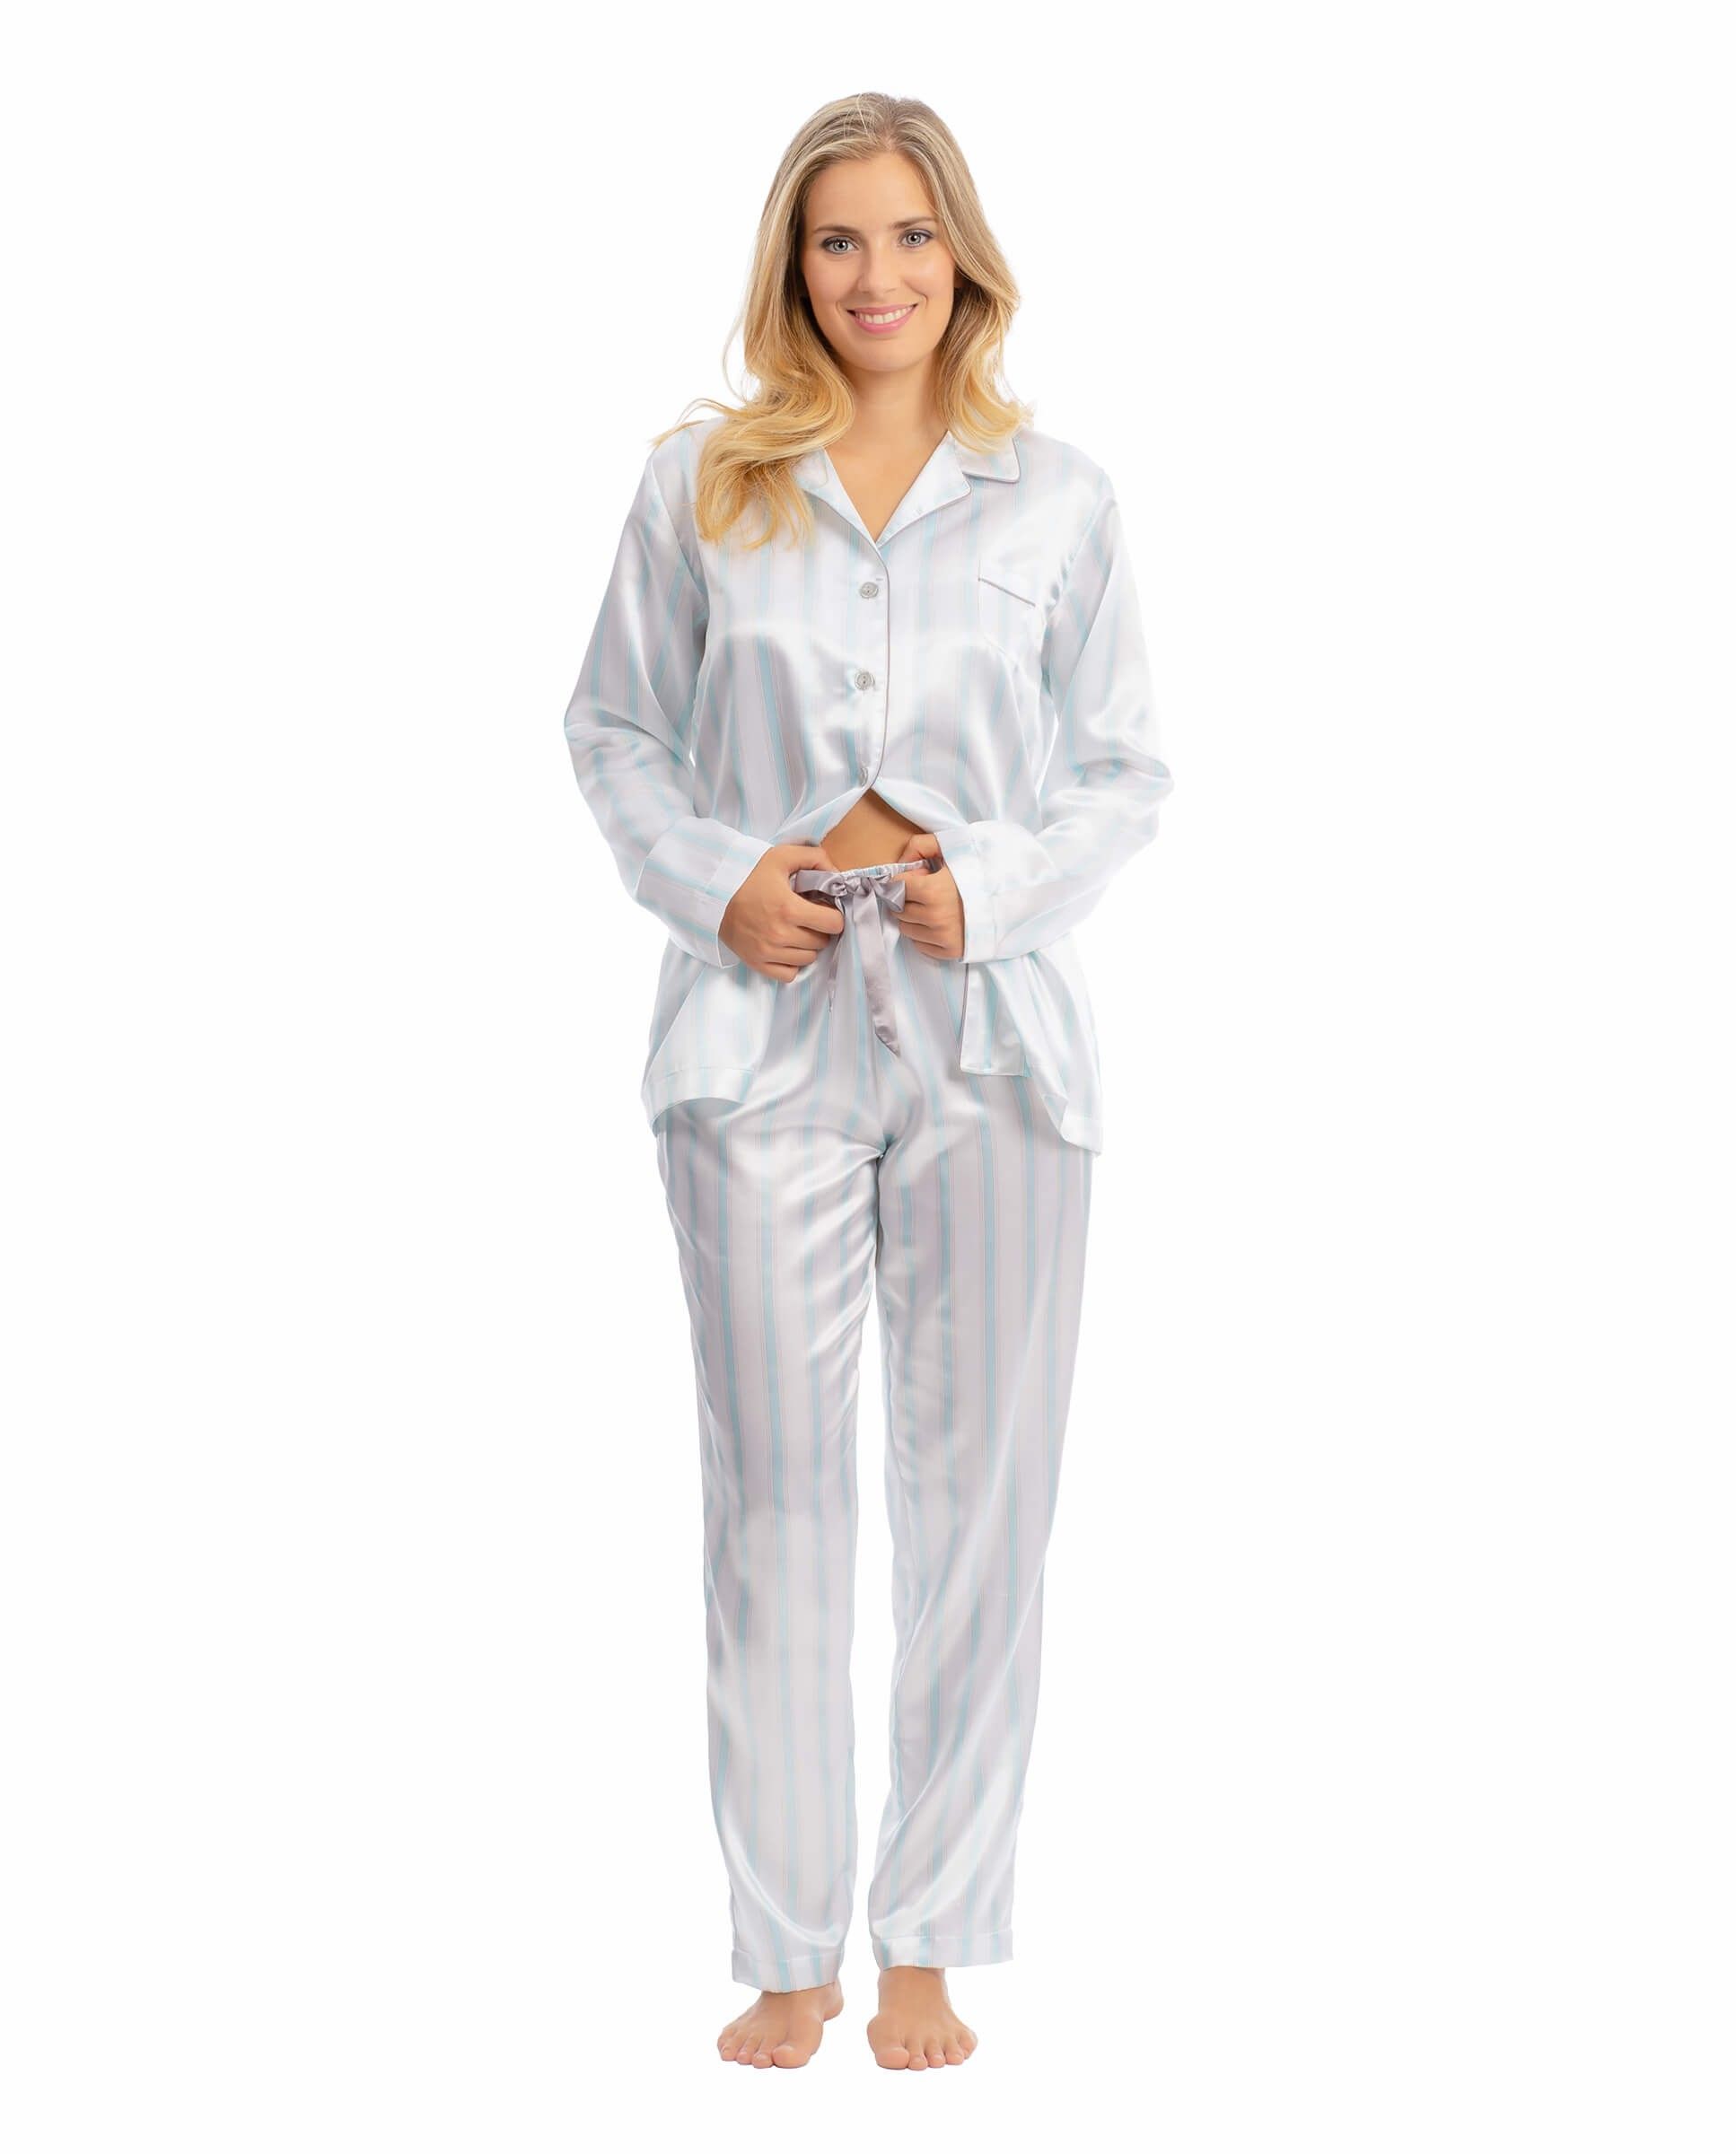 Satin sleepwear set consisting of long trousers and matching long-sleeved jacket with turquoise stripes and grey details.